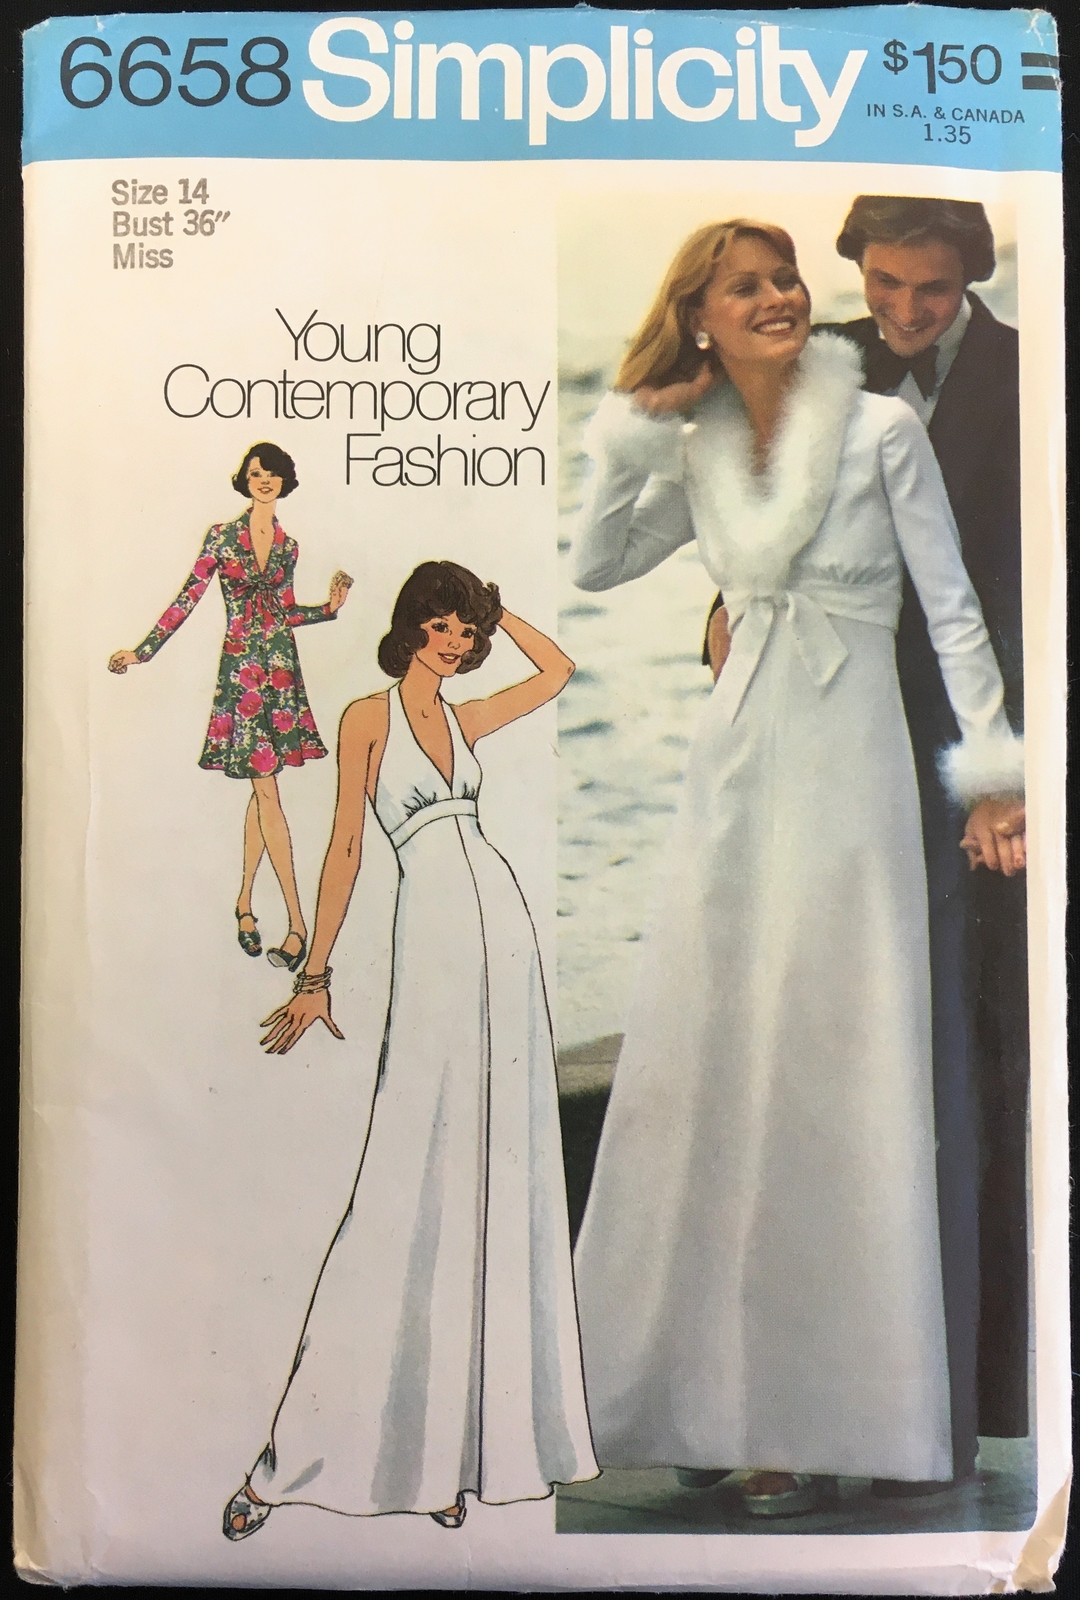 Primary image for Uncut 1970s Size 14 Bust 36 Halter Dress Cropped Jacket Simplicity 6658 Pattern